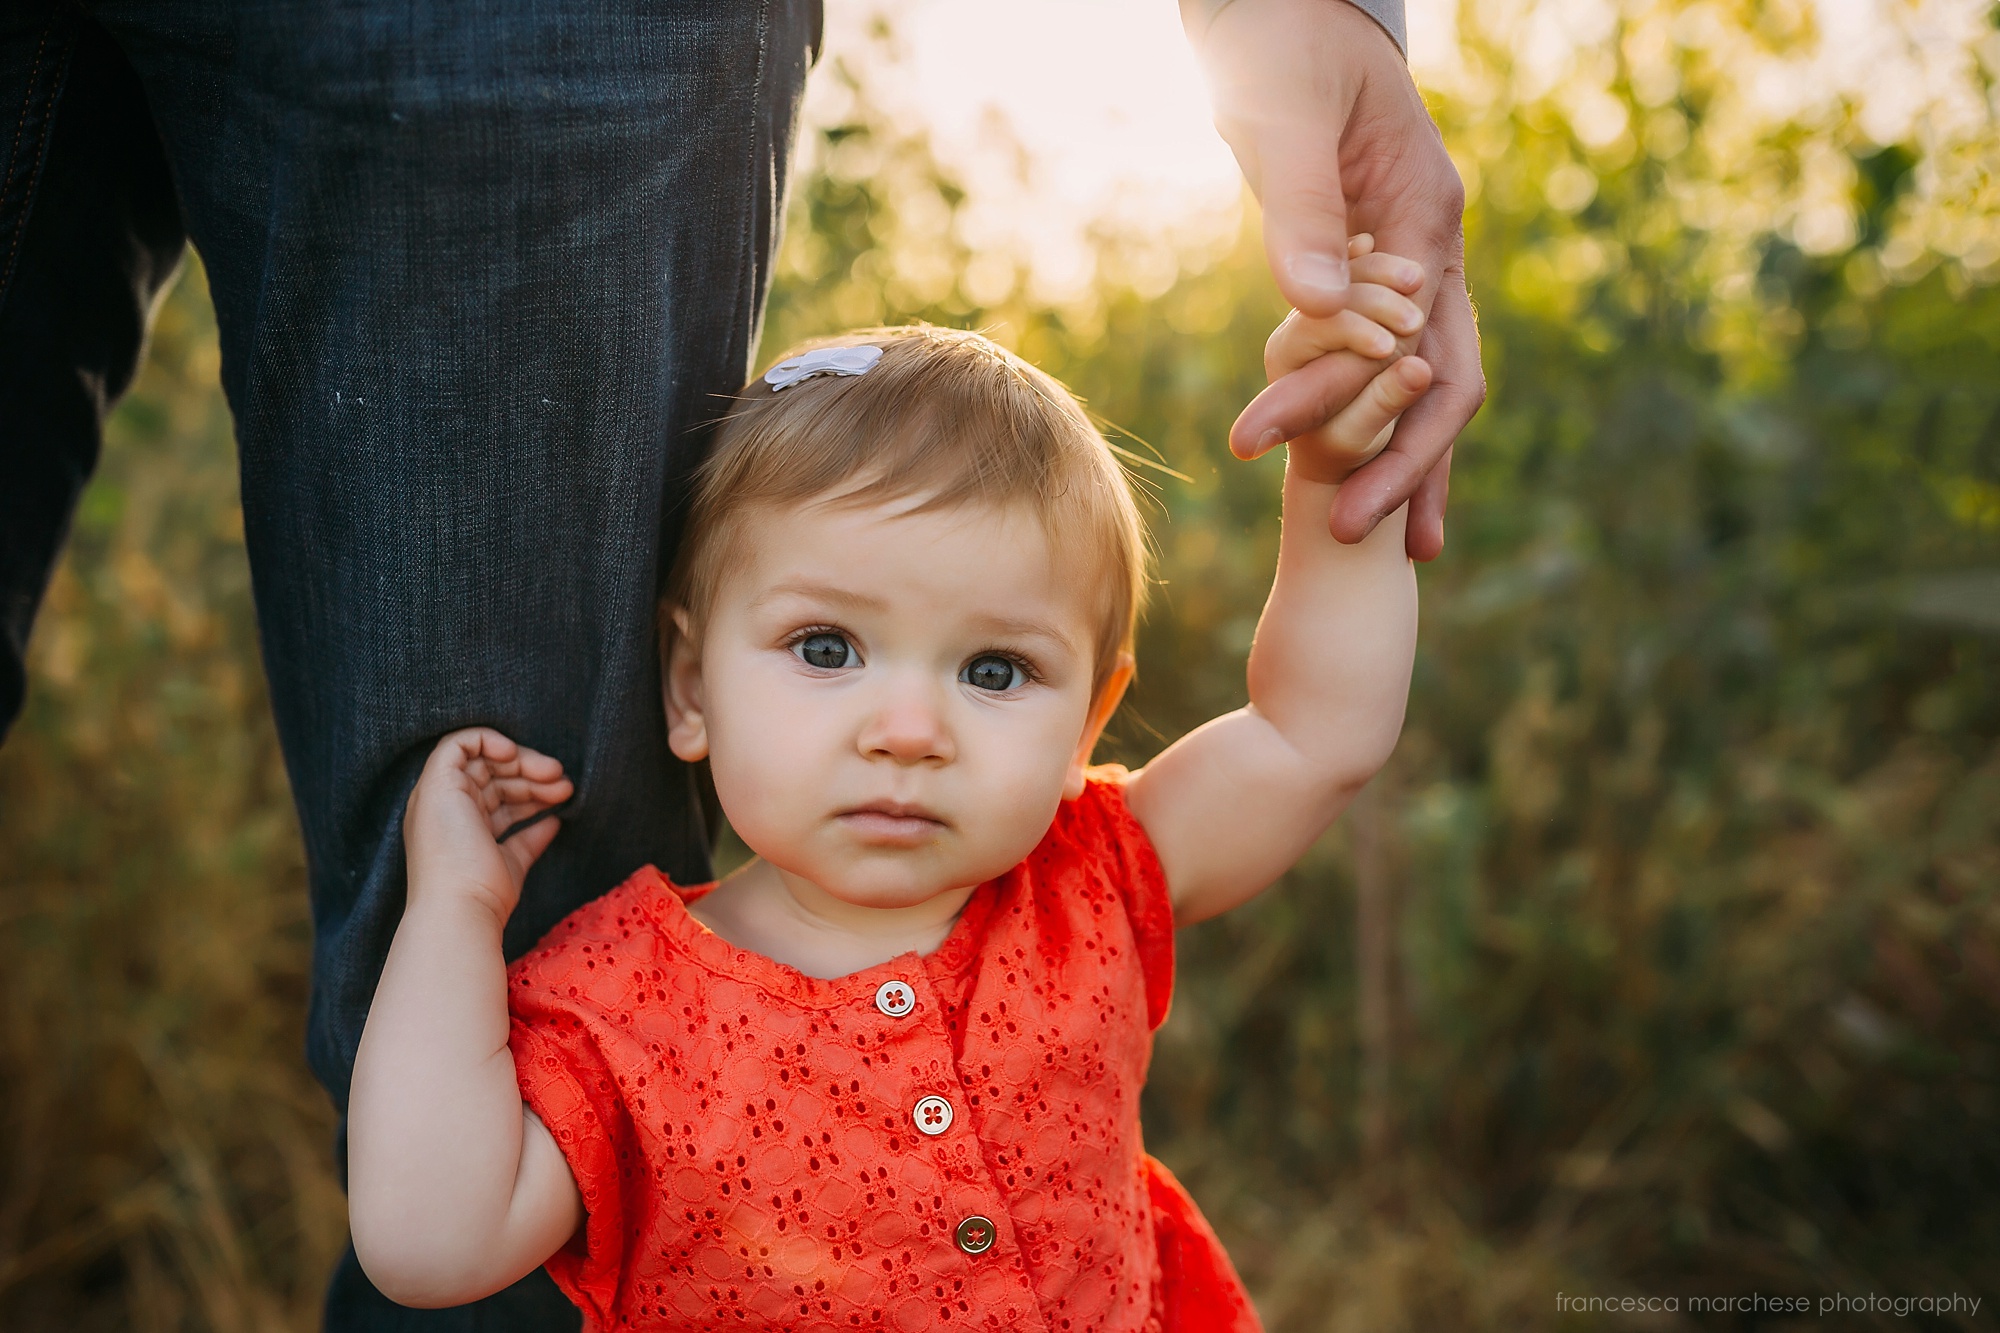 Francesca Marchese Photography one year old holding daddy's hand